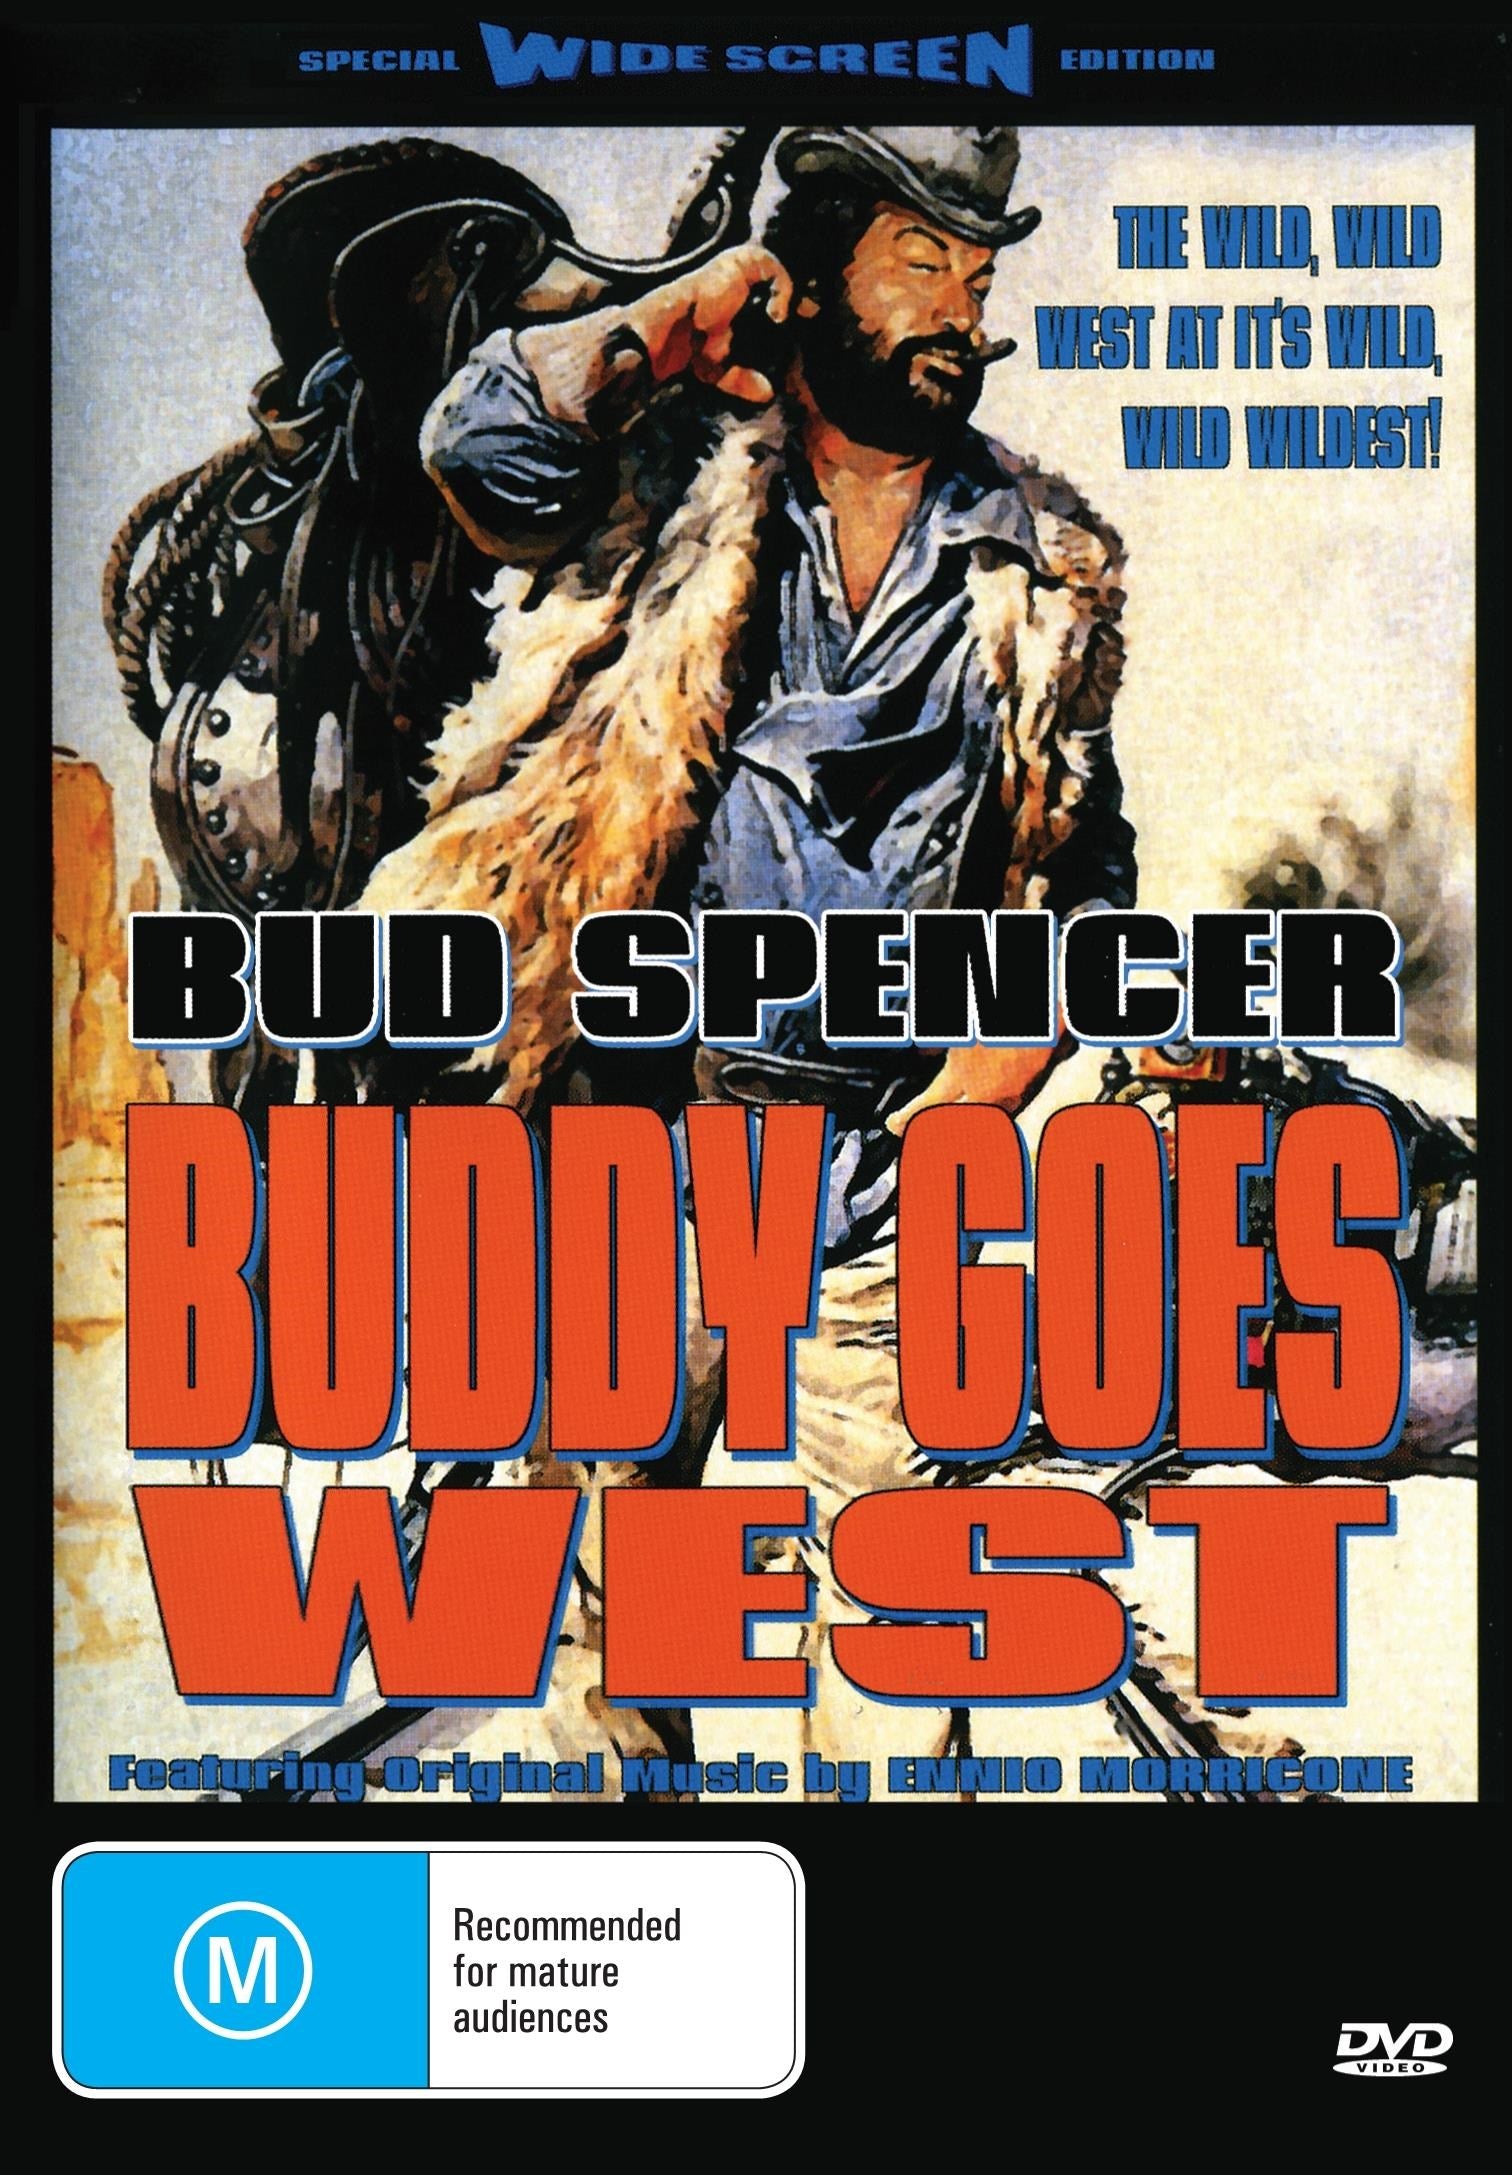 Buddy Goes West rareandcollectibledvds